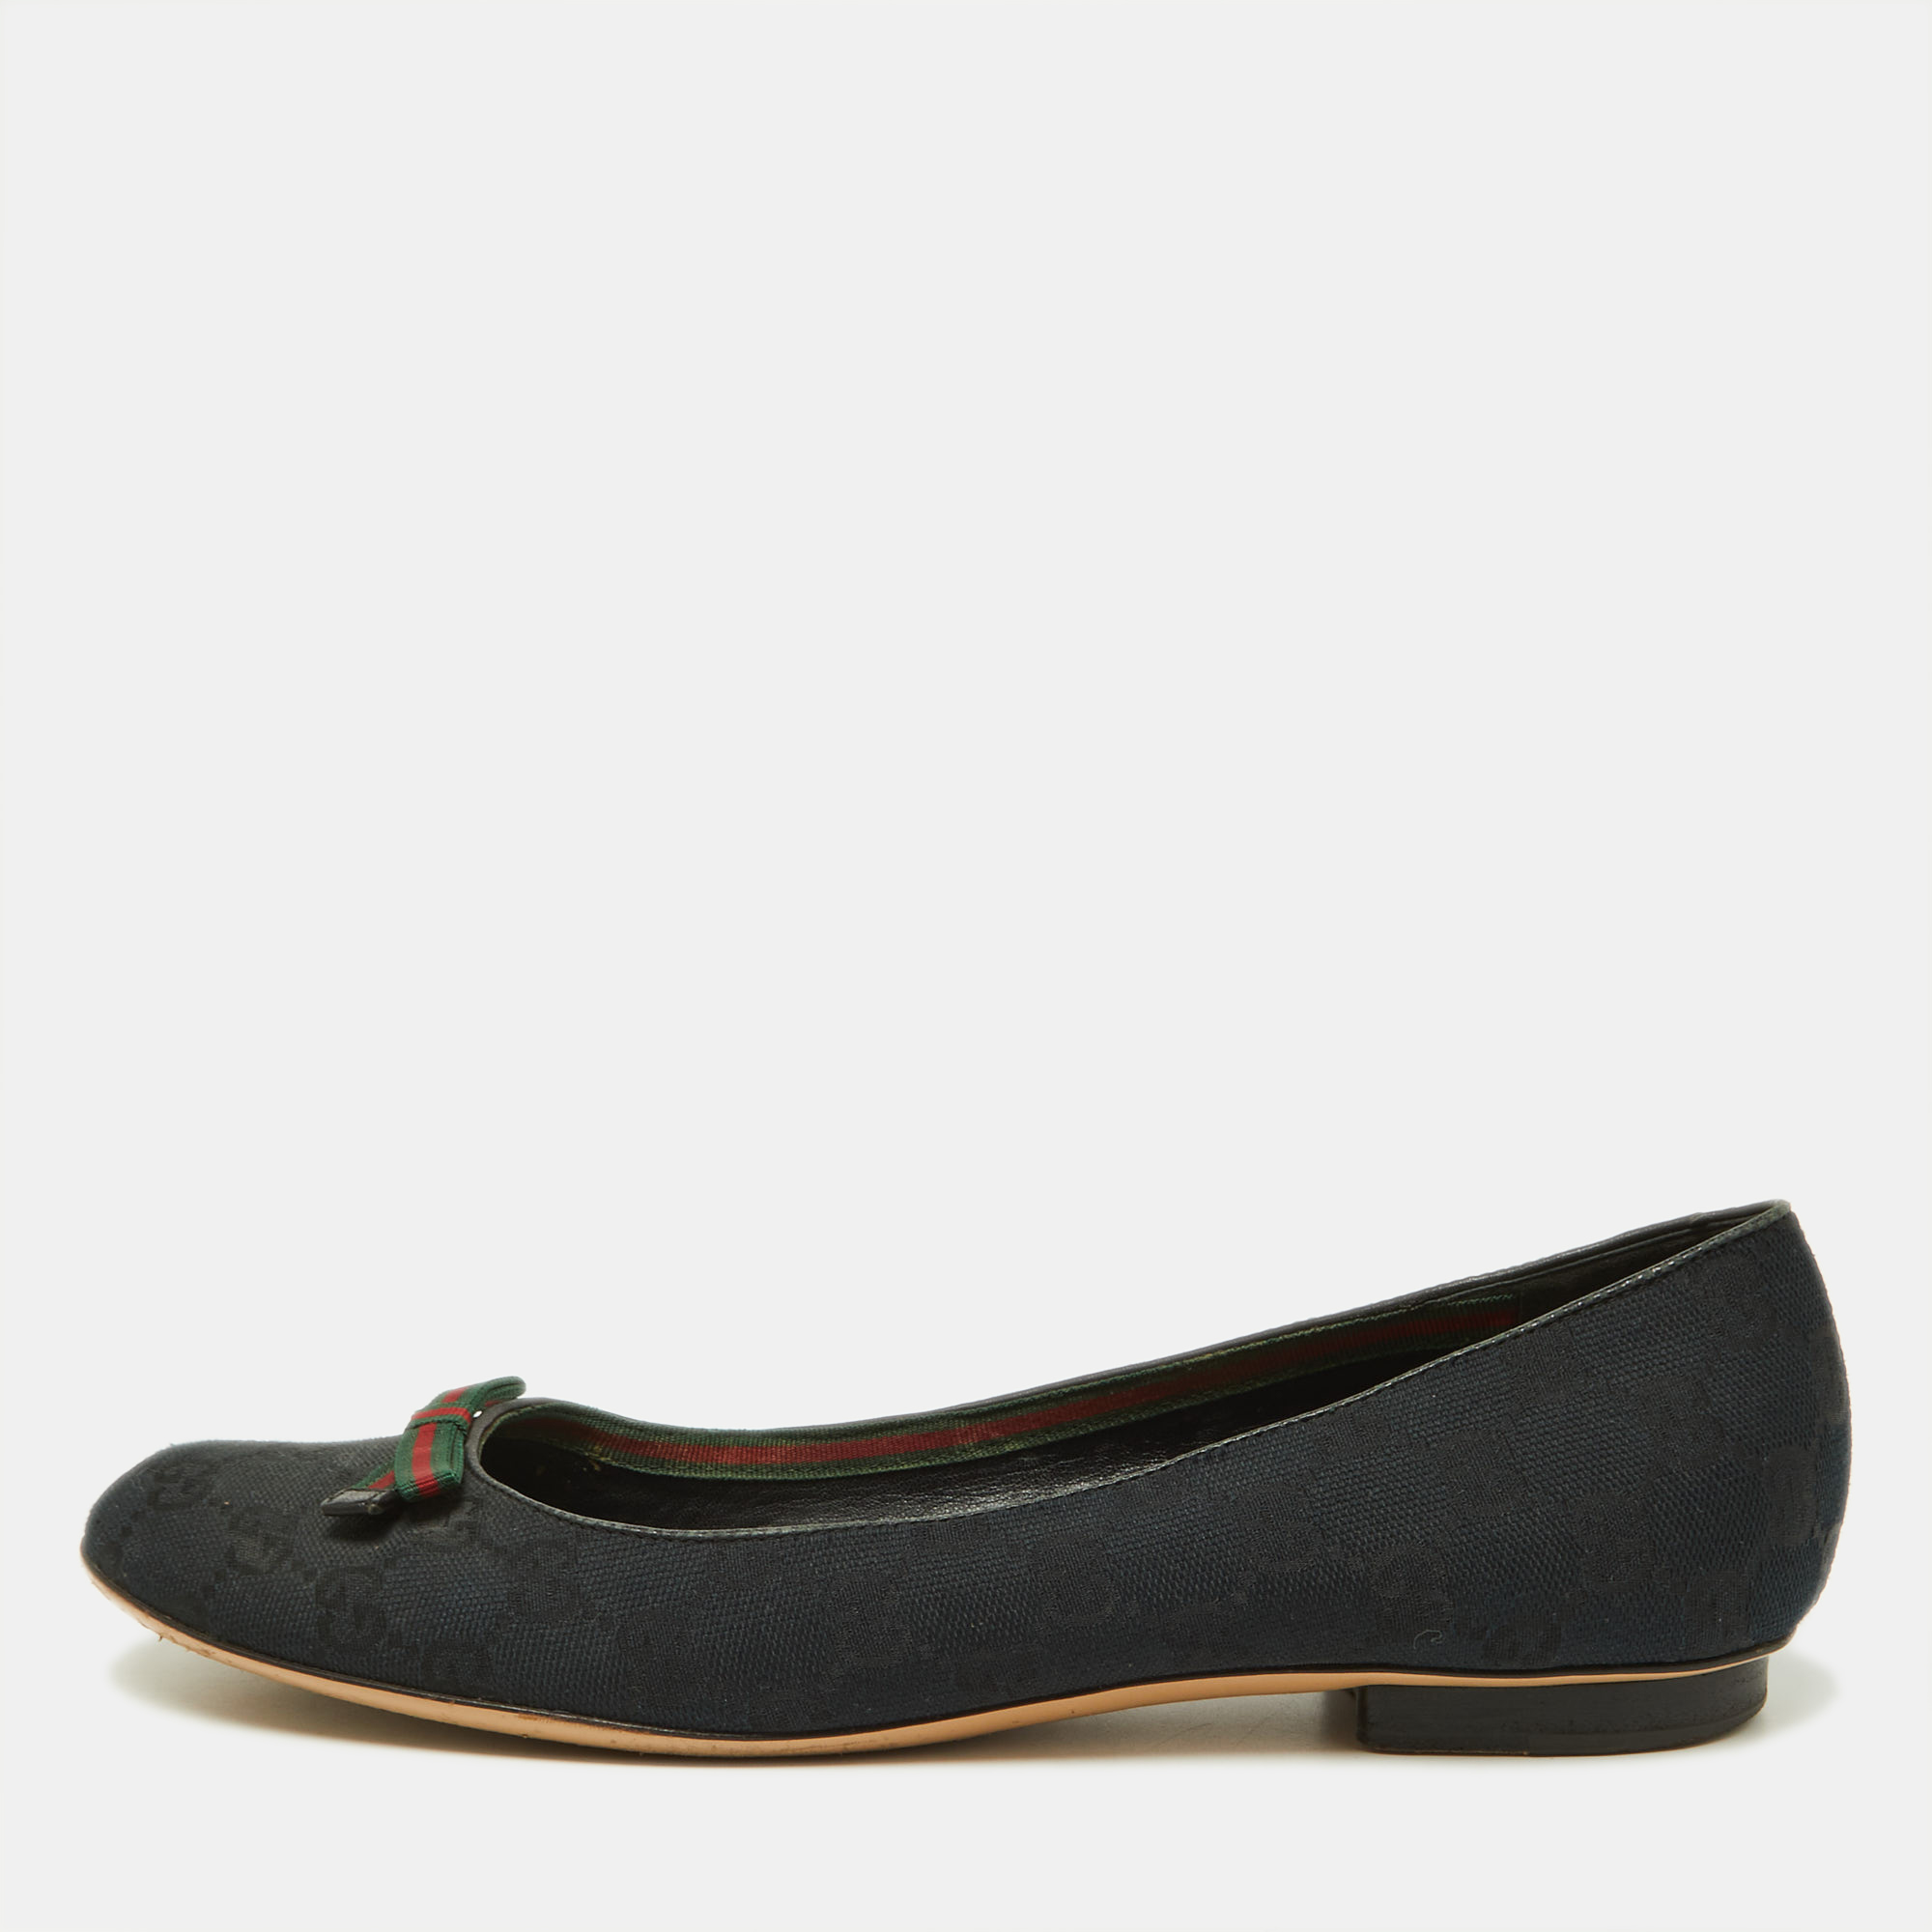 Pre-owned Gucci Black Gg Canvas Web Bow Ballet Flats Size 40.5